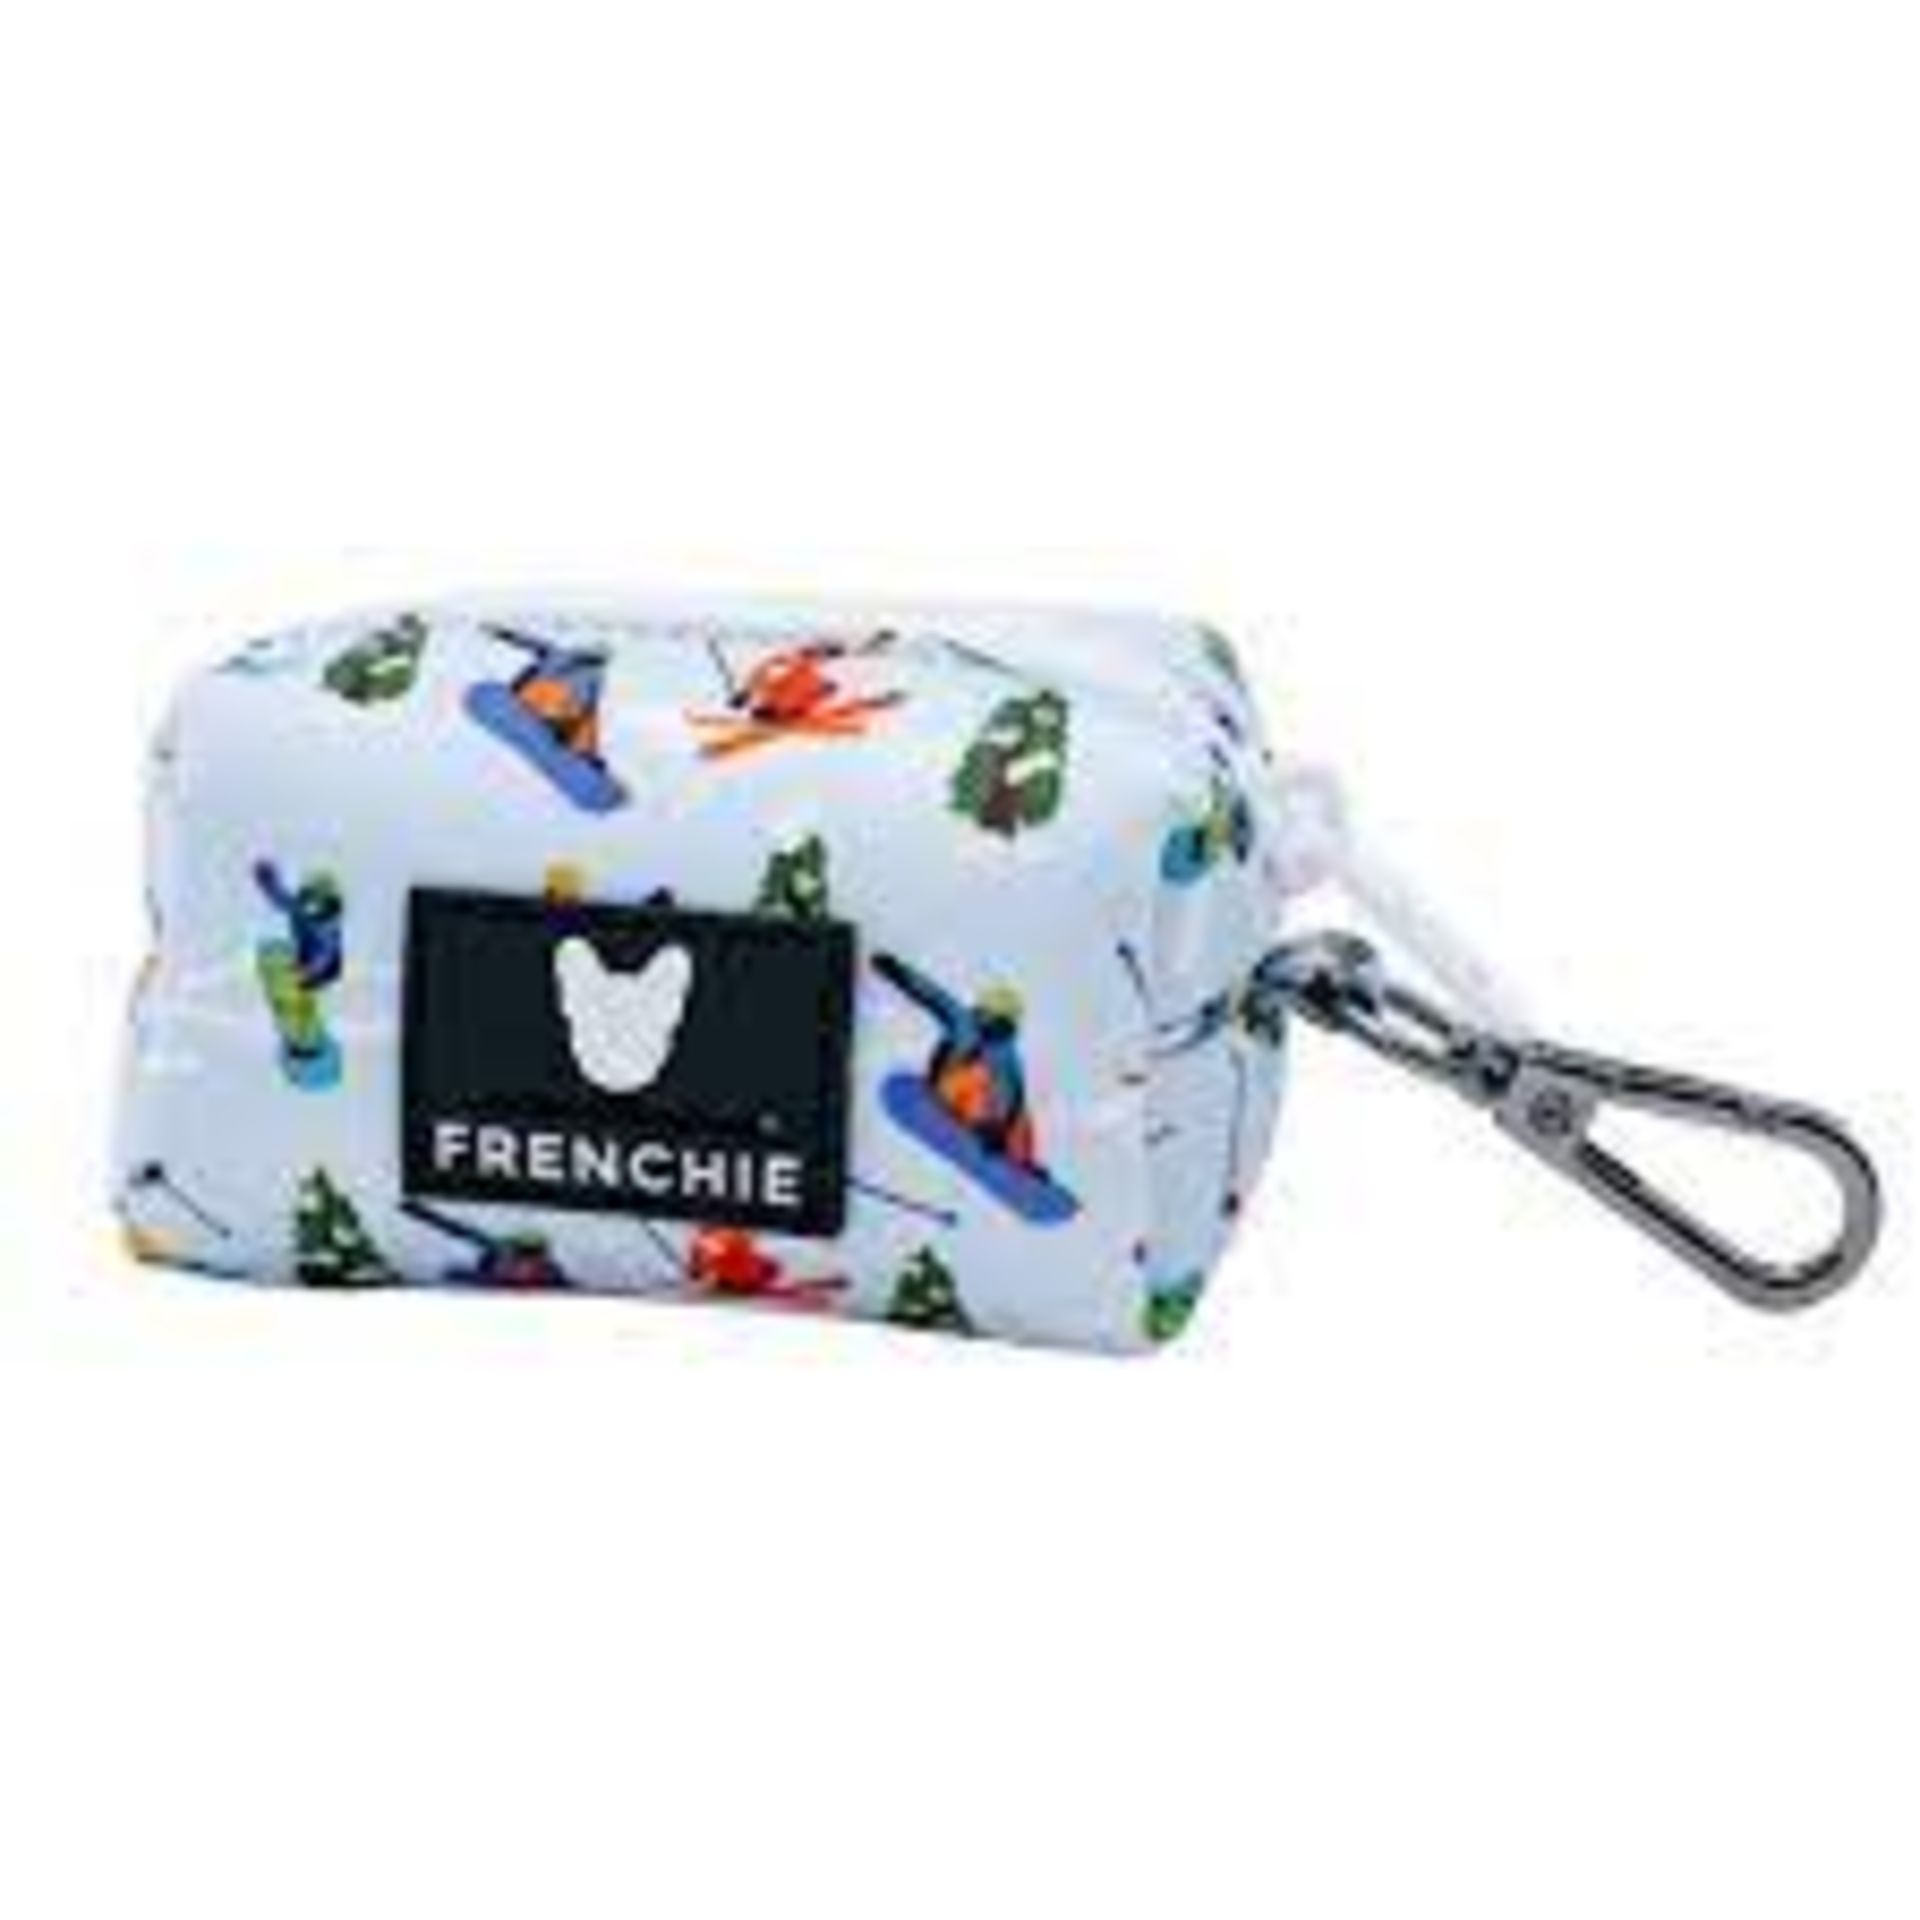 Trade Lot 50 X New .Packaged Frenchie The Bulldog Luxury Branded Dog Products. May include items - Image 21 of 50